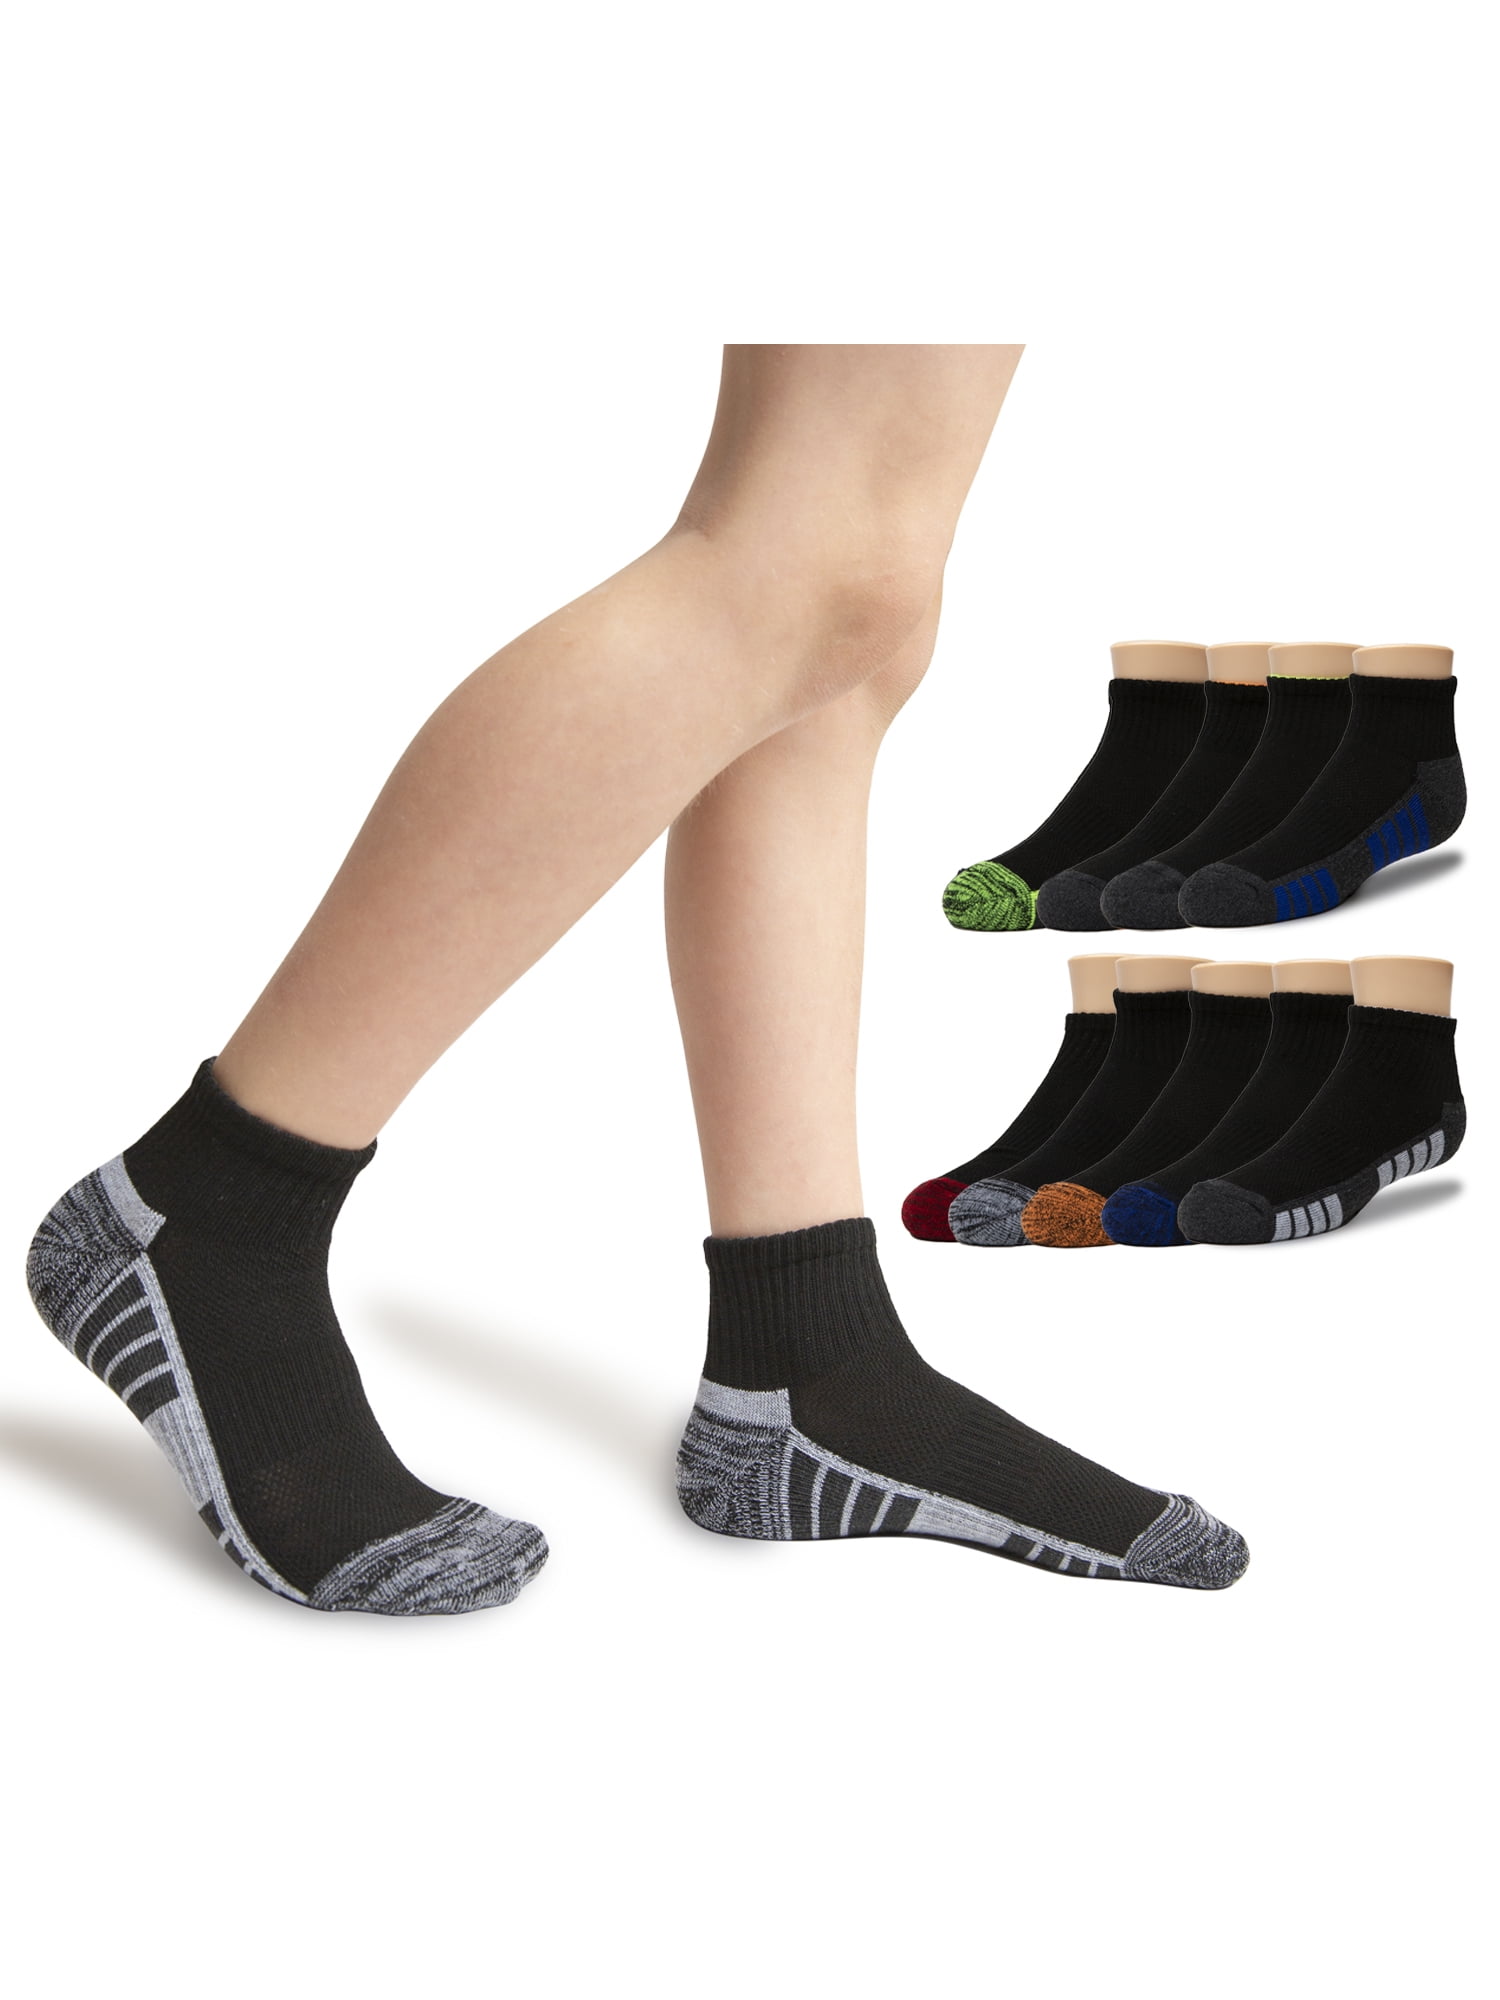 Athletic Works Boys Cushioned Ankle Socks, 10-Pack S (4-8.5) - L (3-9)